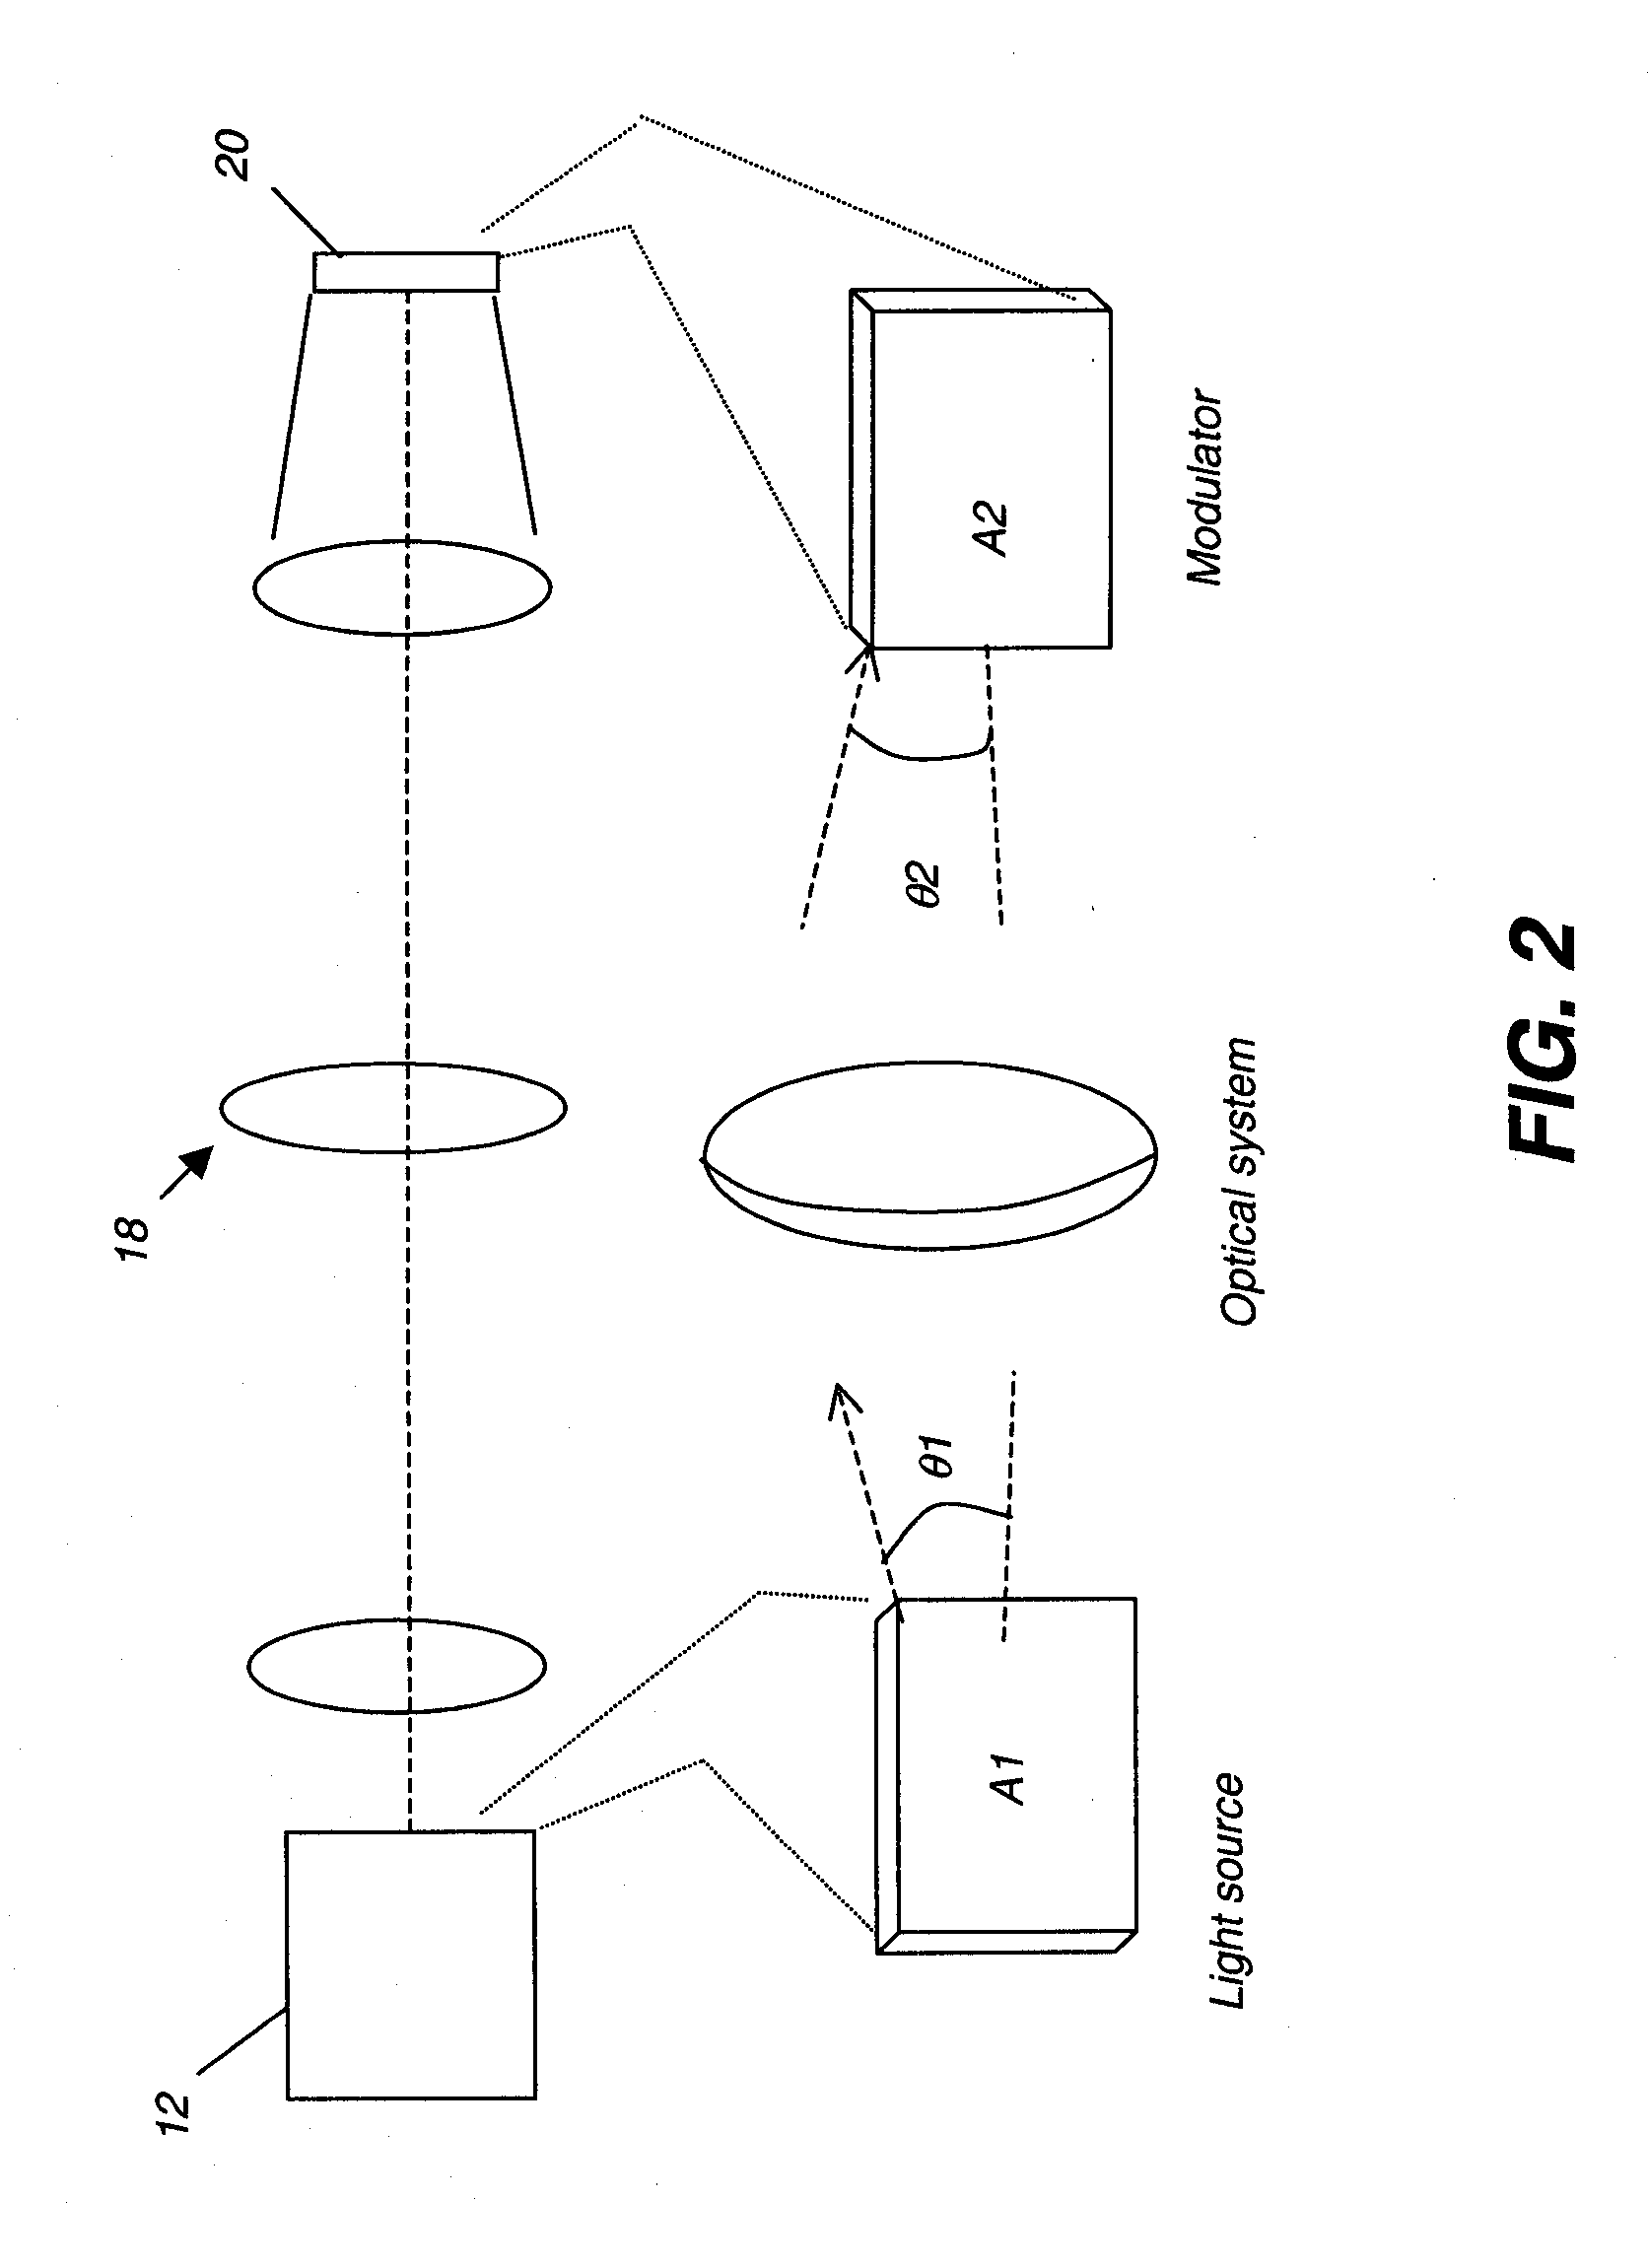 Projection apparatus using solid-state light source array